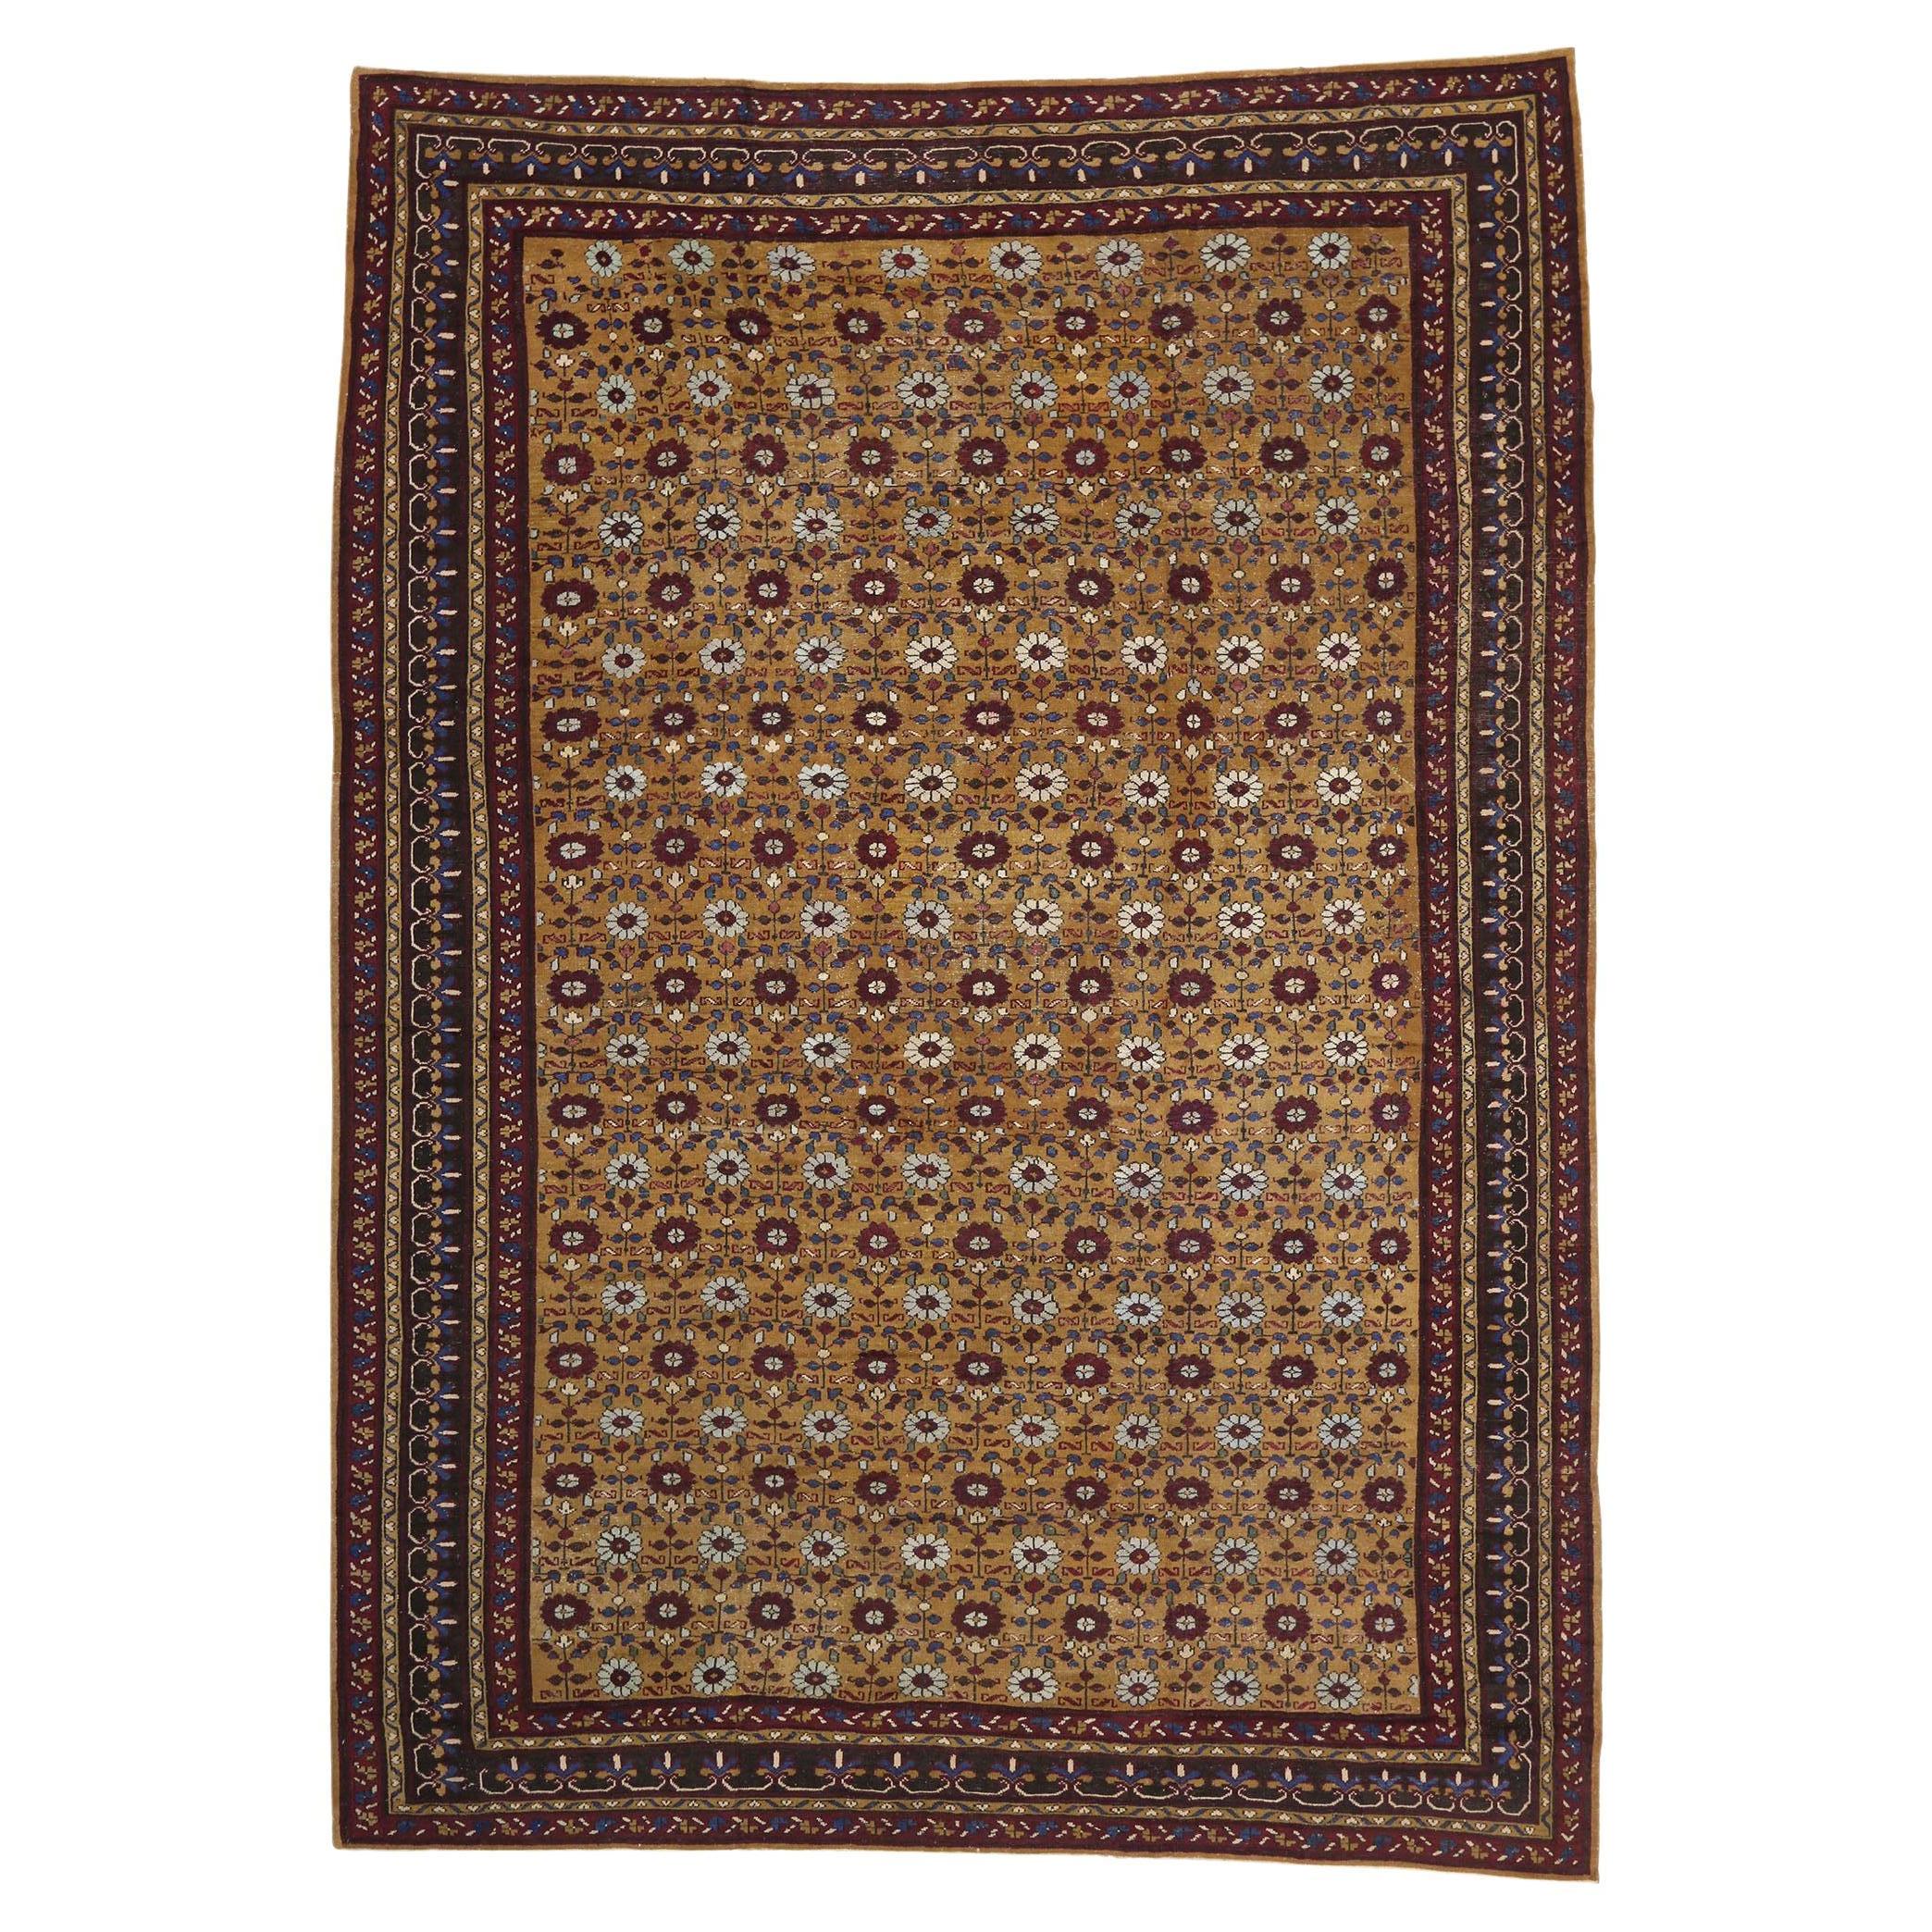 Late 19th Century Antique Indian Agra Carpet, 12'00 x 16'09 For Sale